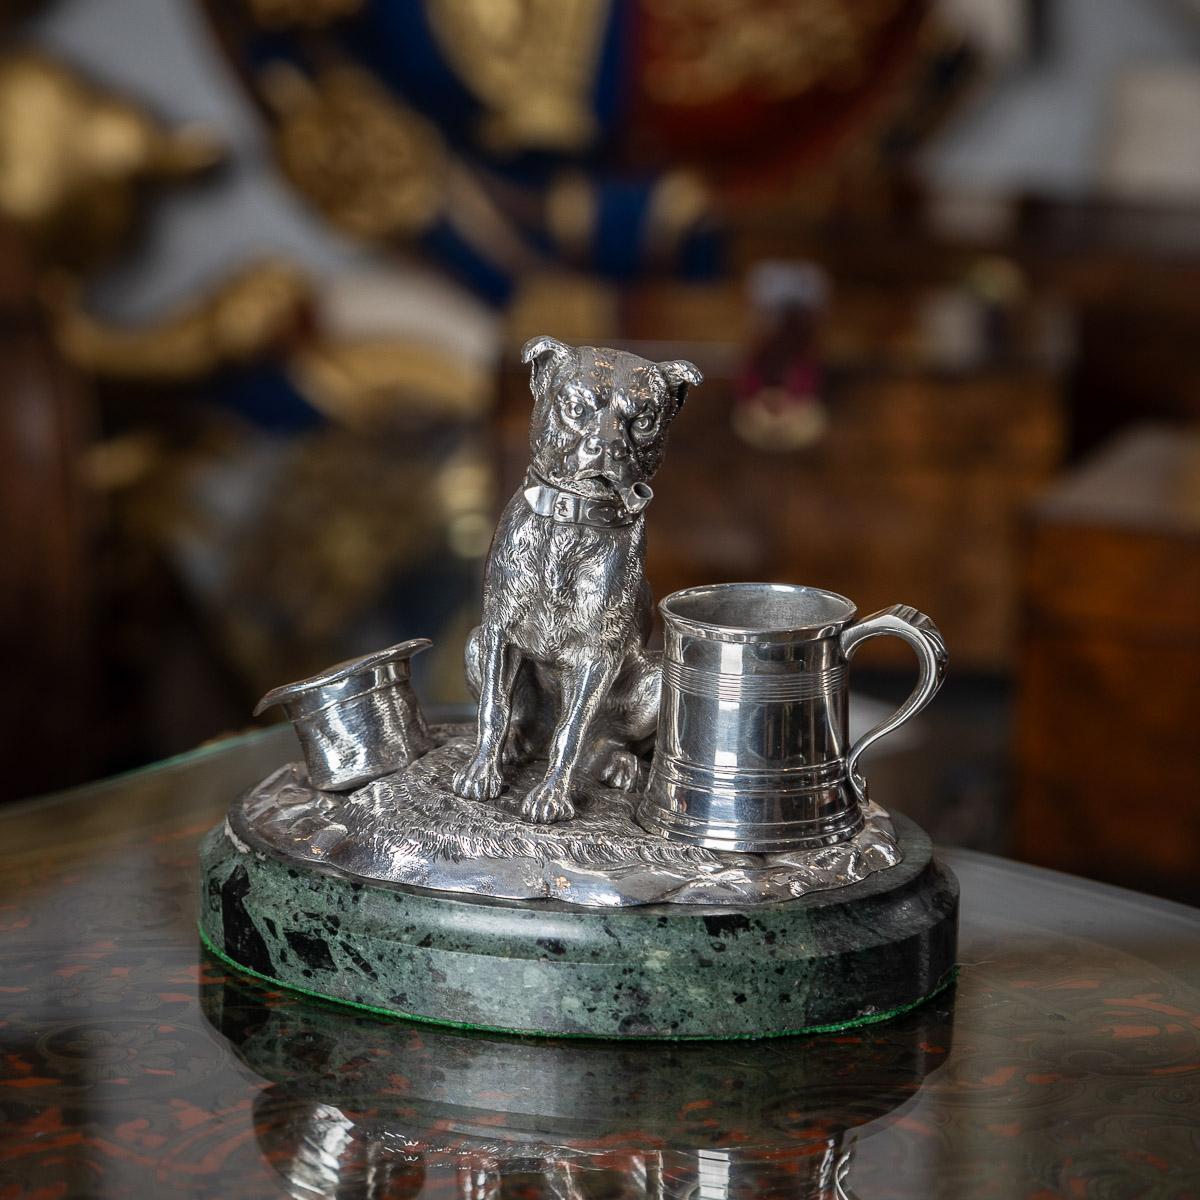 Antique 19th Century Victorian solid silver smoker's compendium, fashioned in the form of a seated dog indulging in a pipe, featuring a pull-off head. The charming design is complemented by a miniature tapering tankard and a top hat, all gracefully